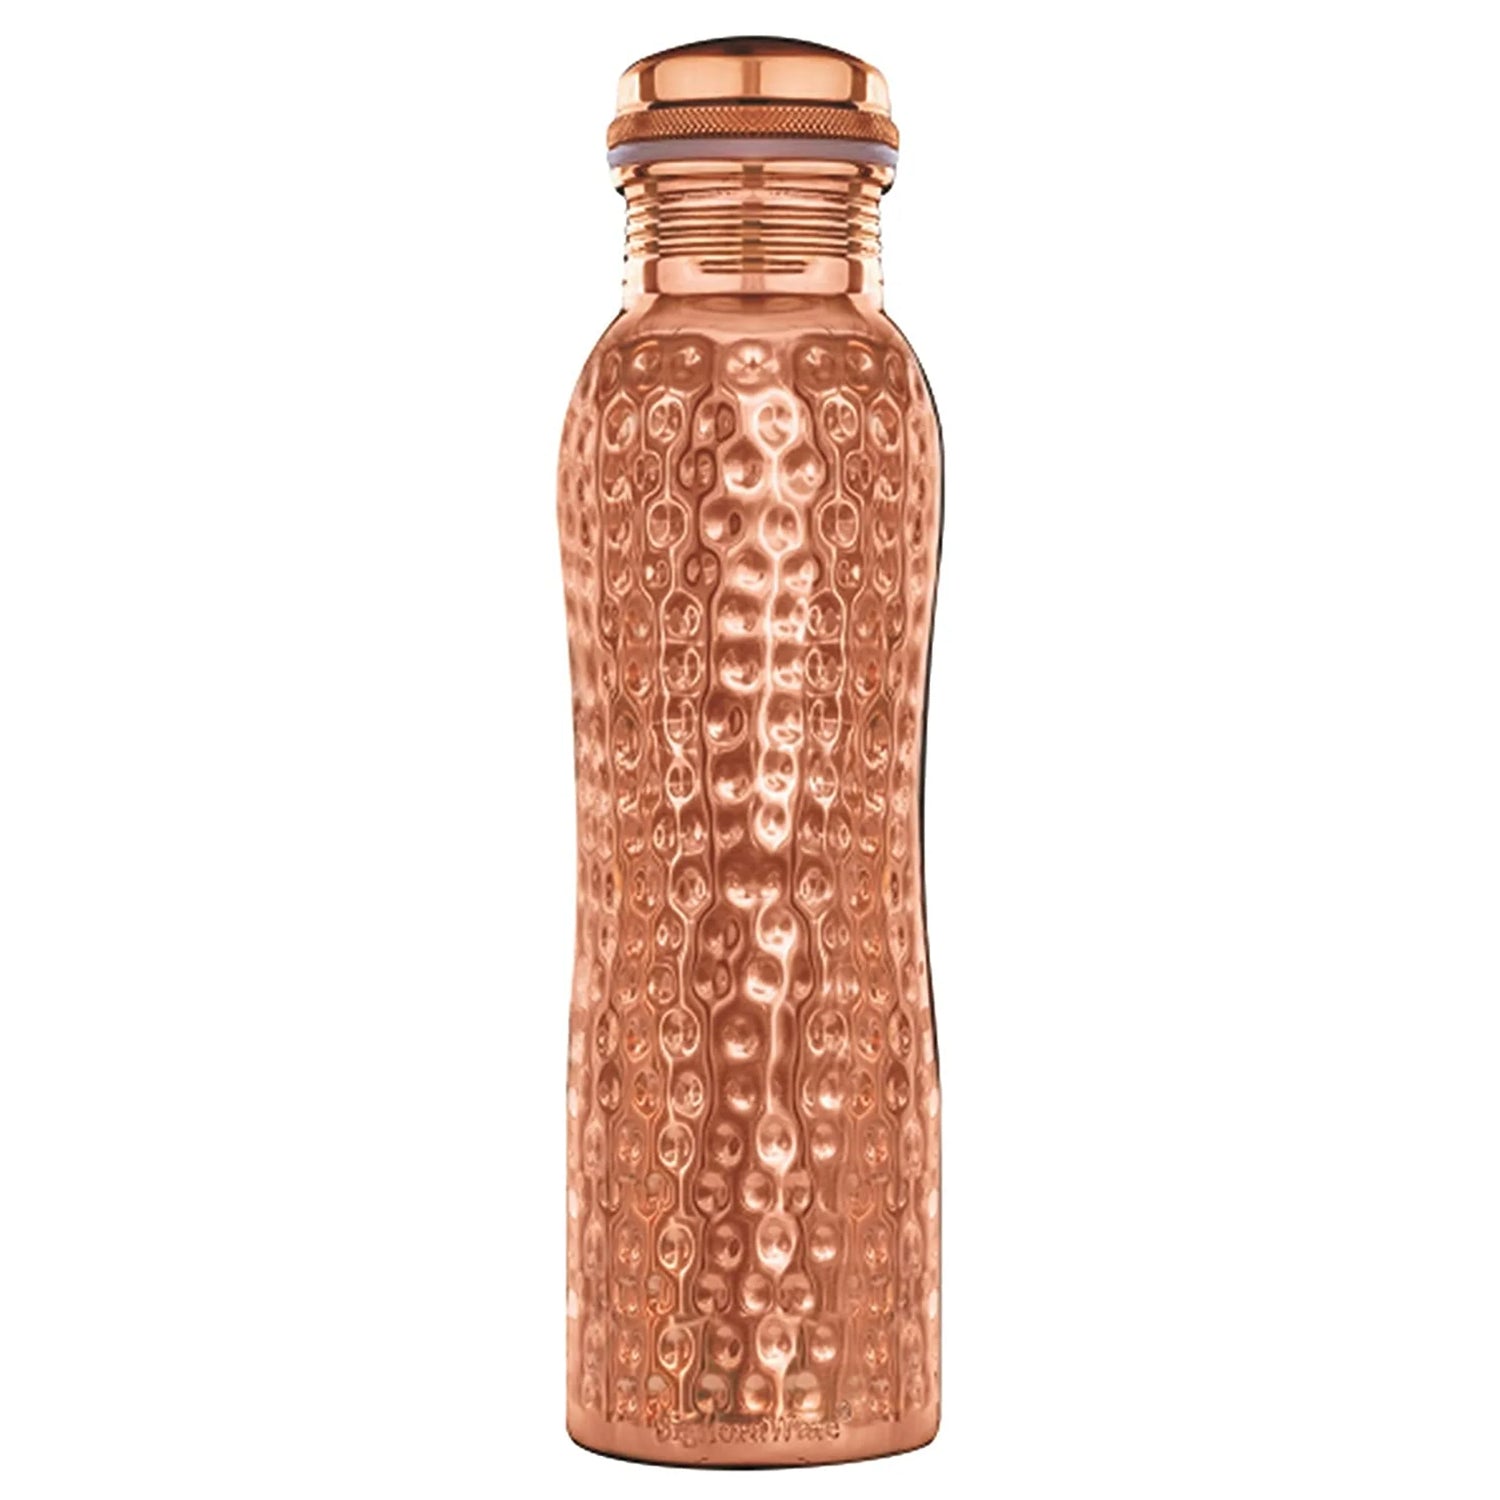 Signoraware Oxy Hammered Copper Bottle - 2456